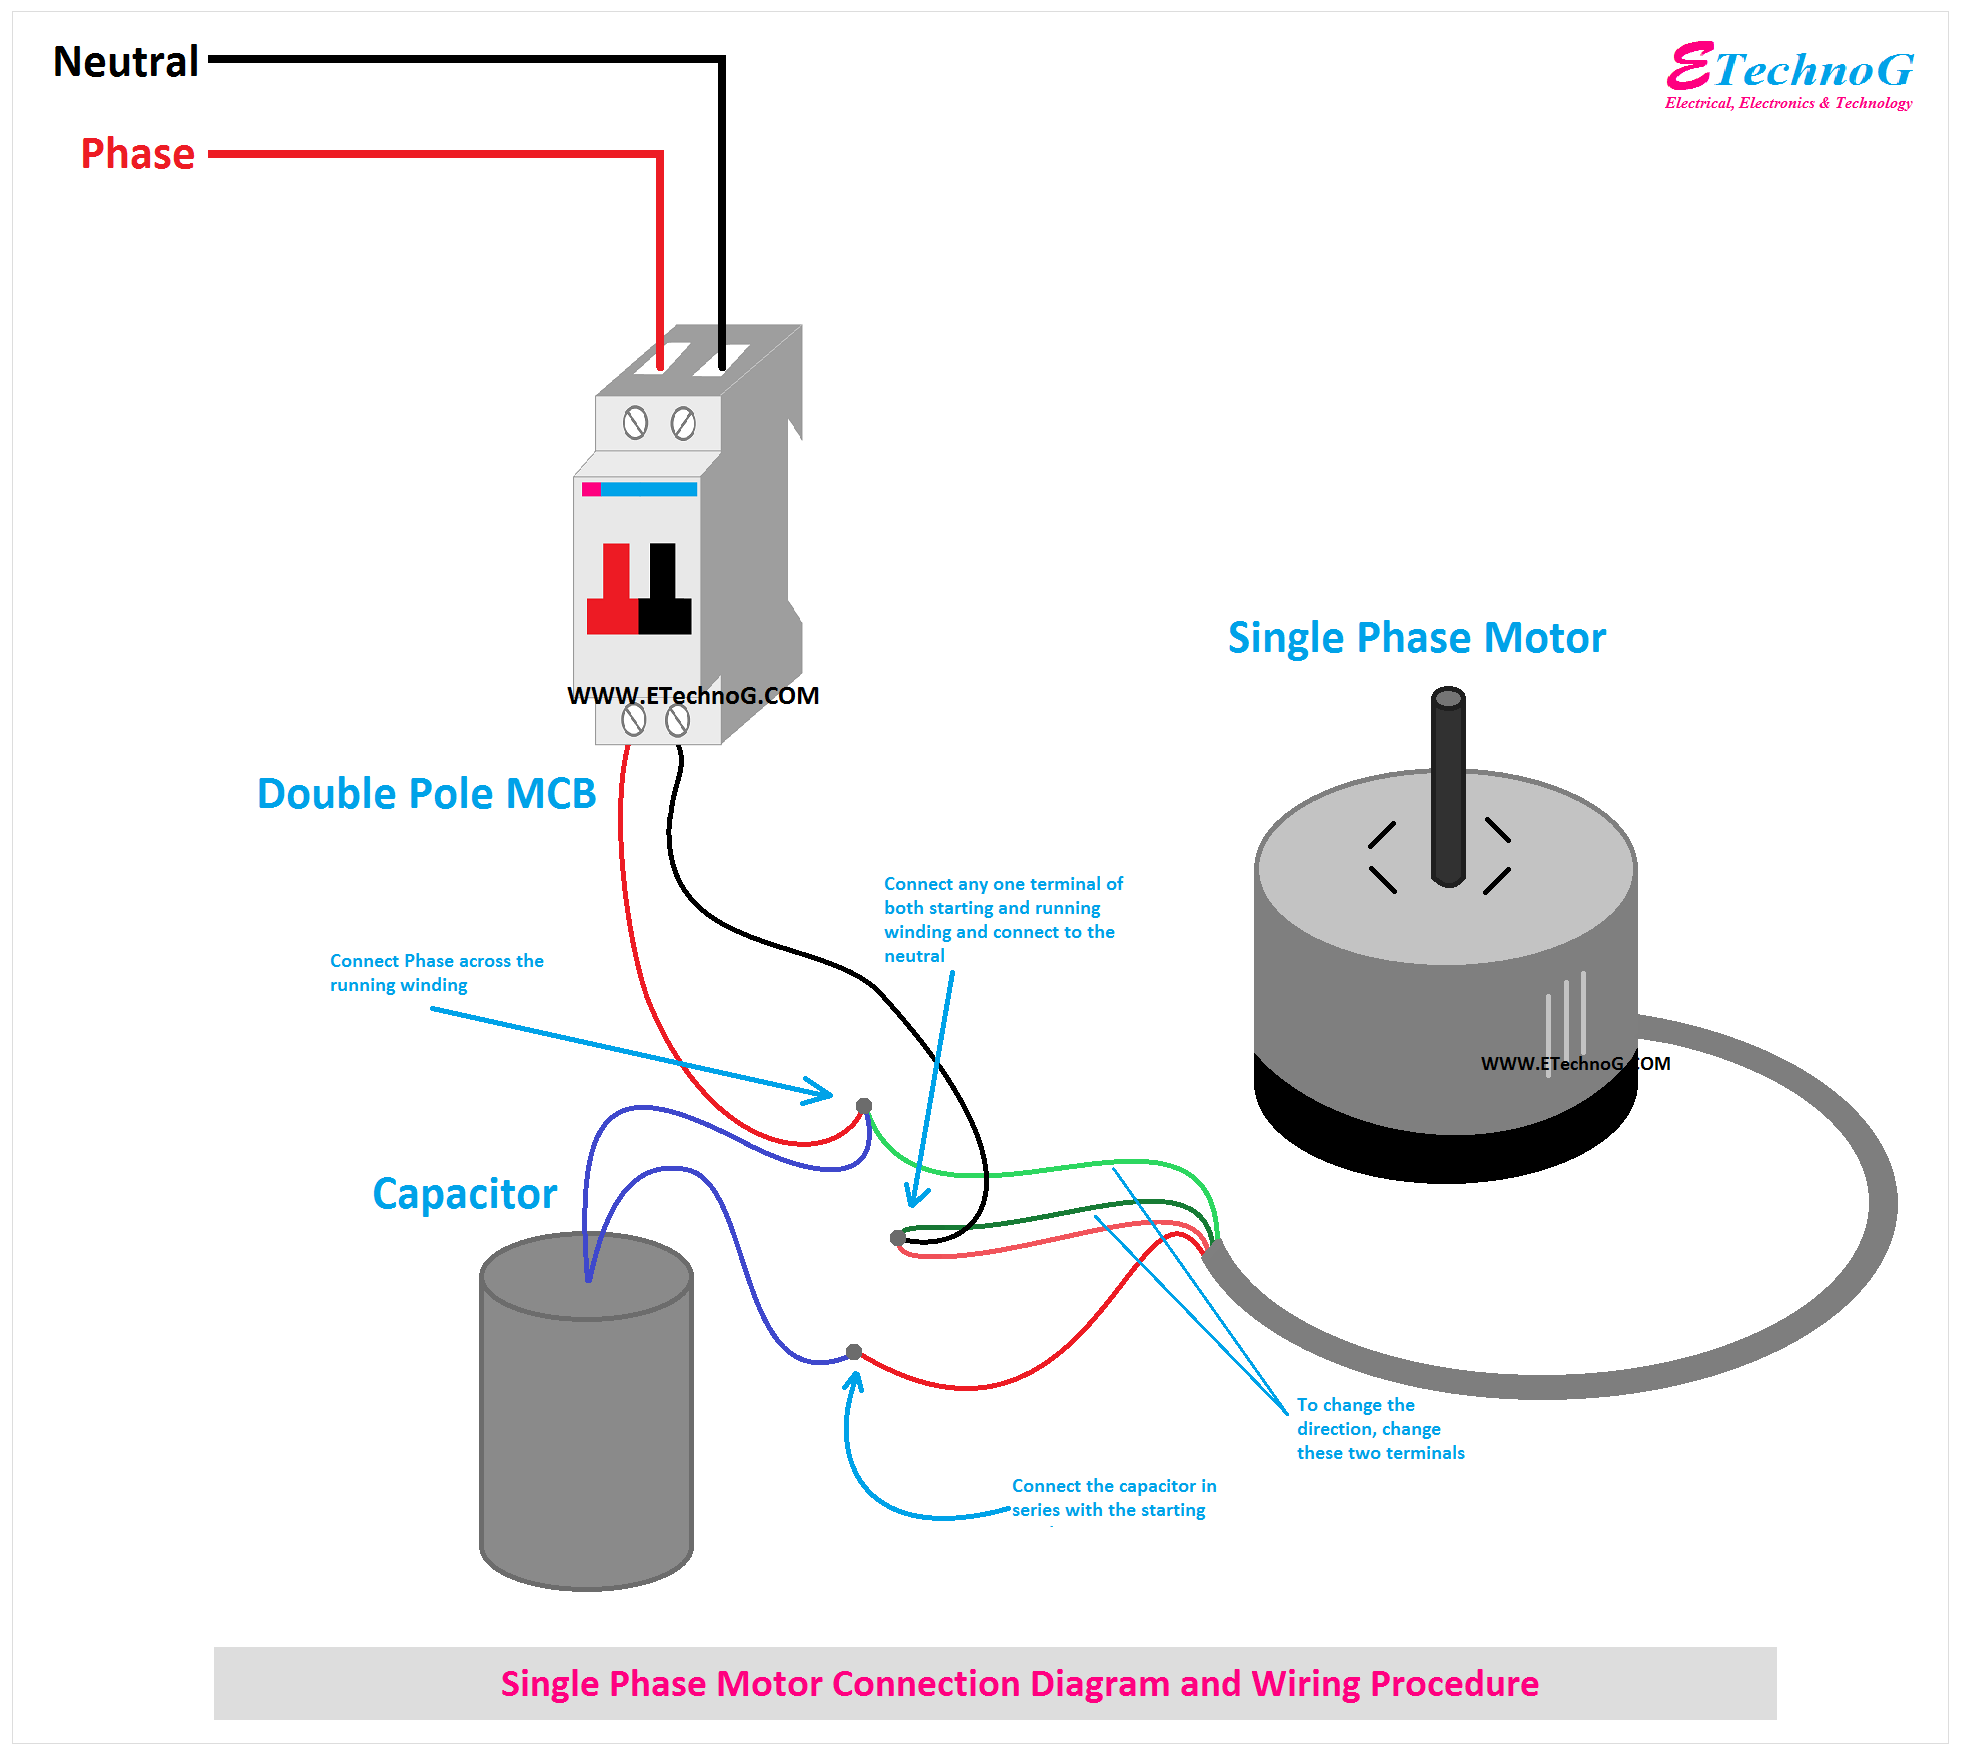 Single Phase Motor Connection Diagram and Wiring Procedure - ETechnoG  Electrical Wiring Diagram For A Motor    ETechnoG